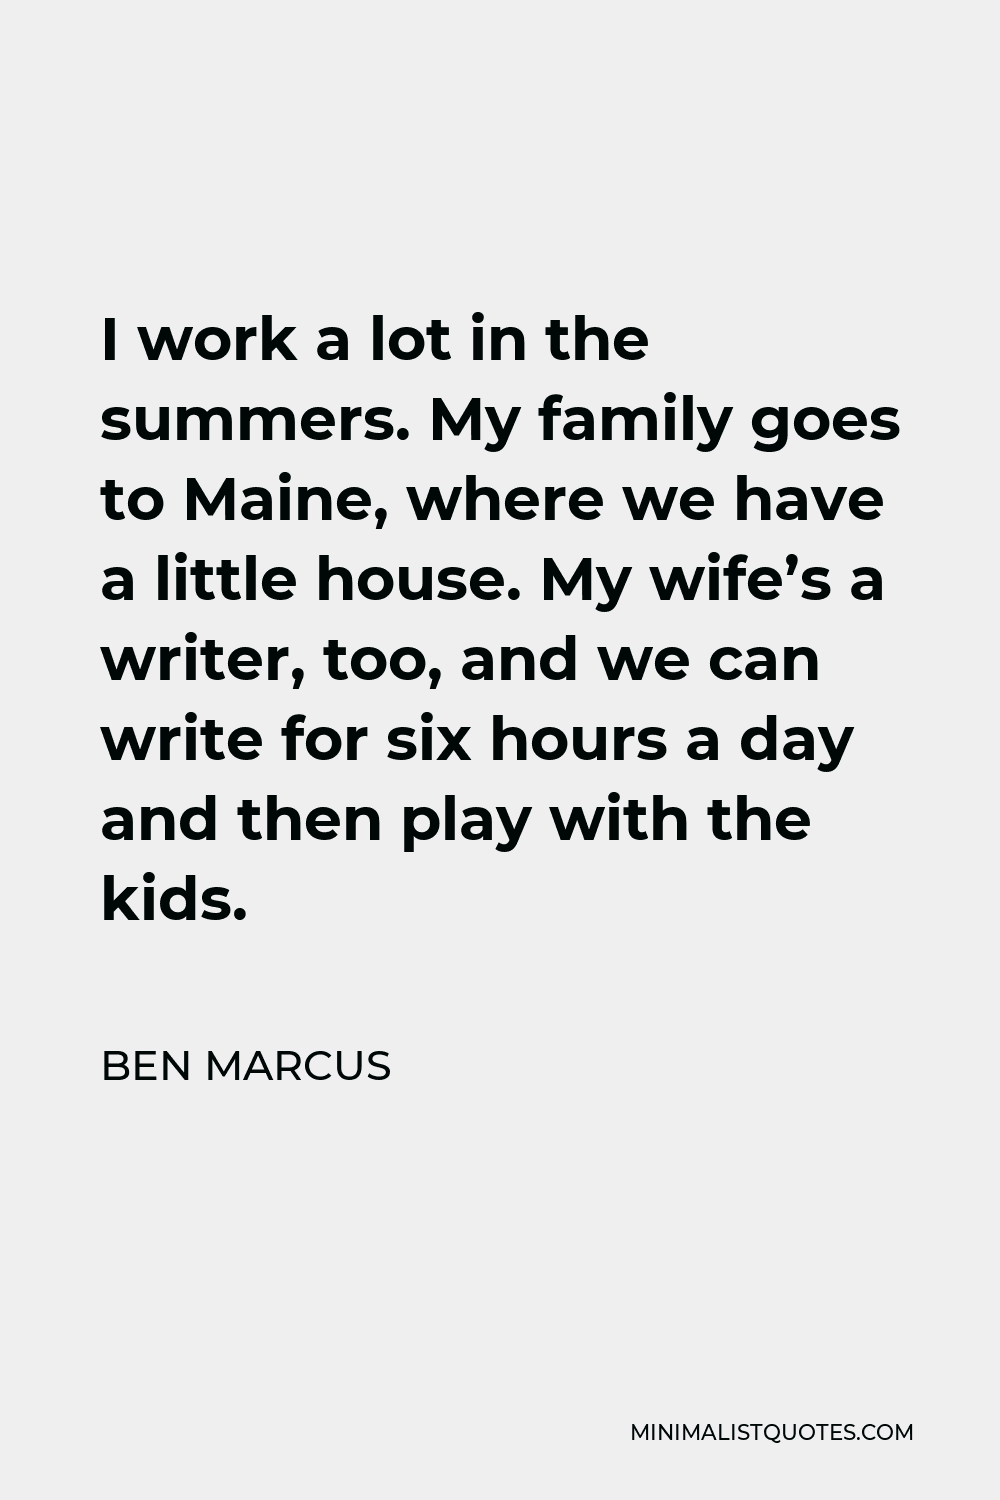 Ben Marcus Quote - I work a lot in the summers. My family goes to Maine, where we have a little house. My wife’s a writer, too, and we can write for six hours a day and then play with the kids.